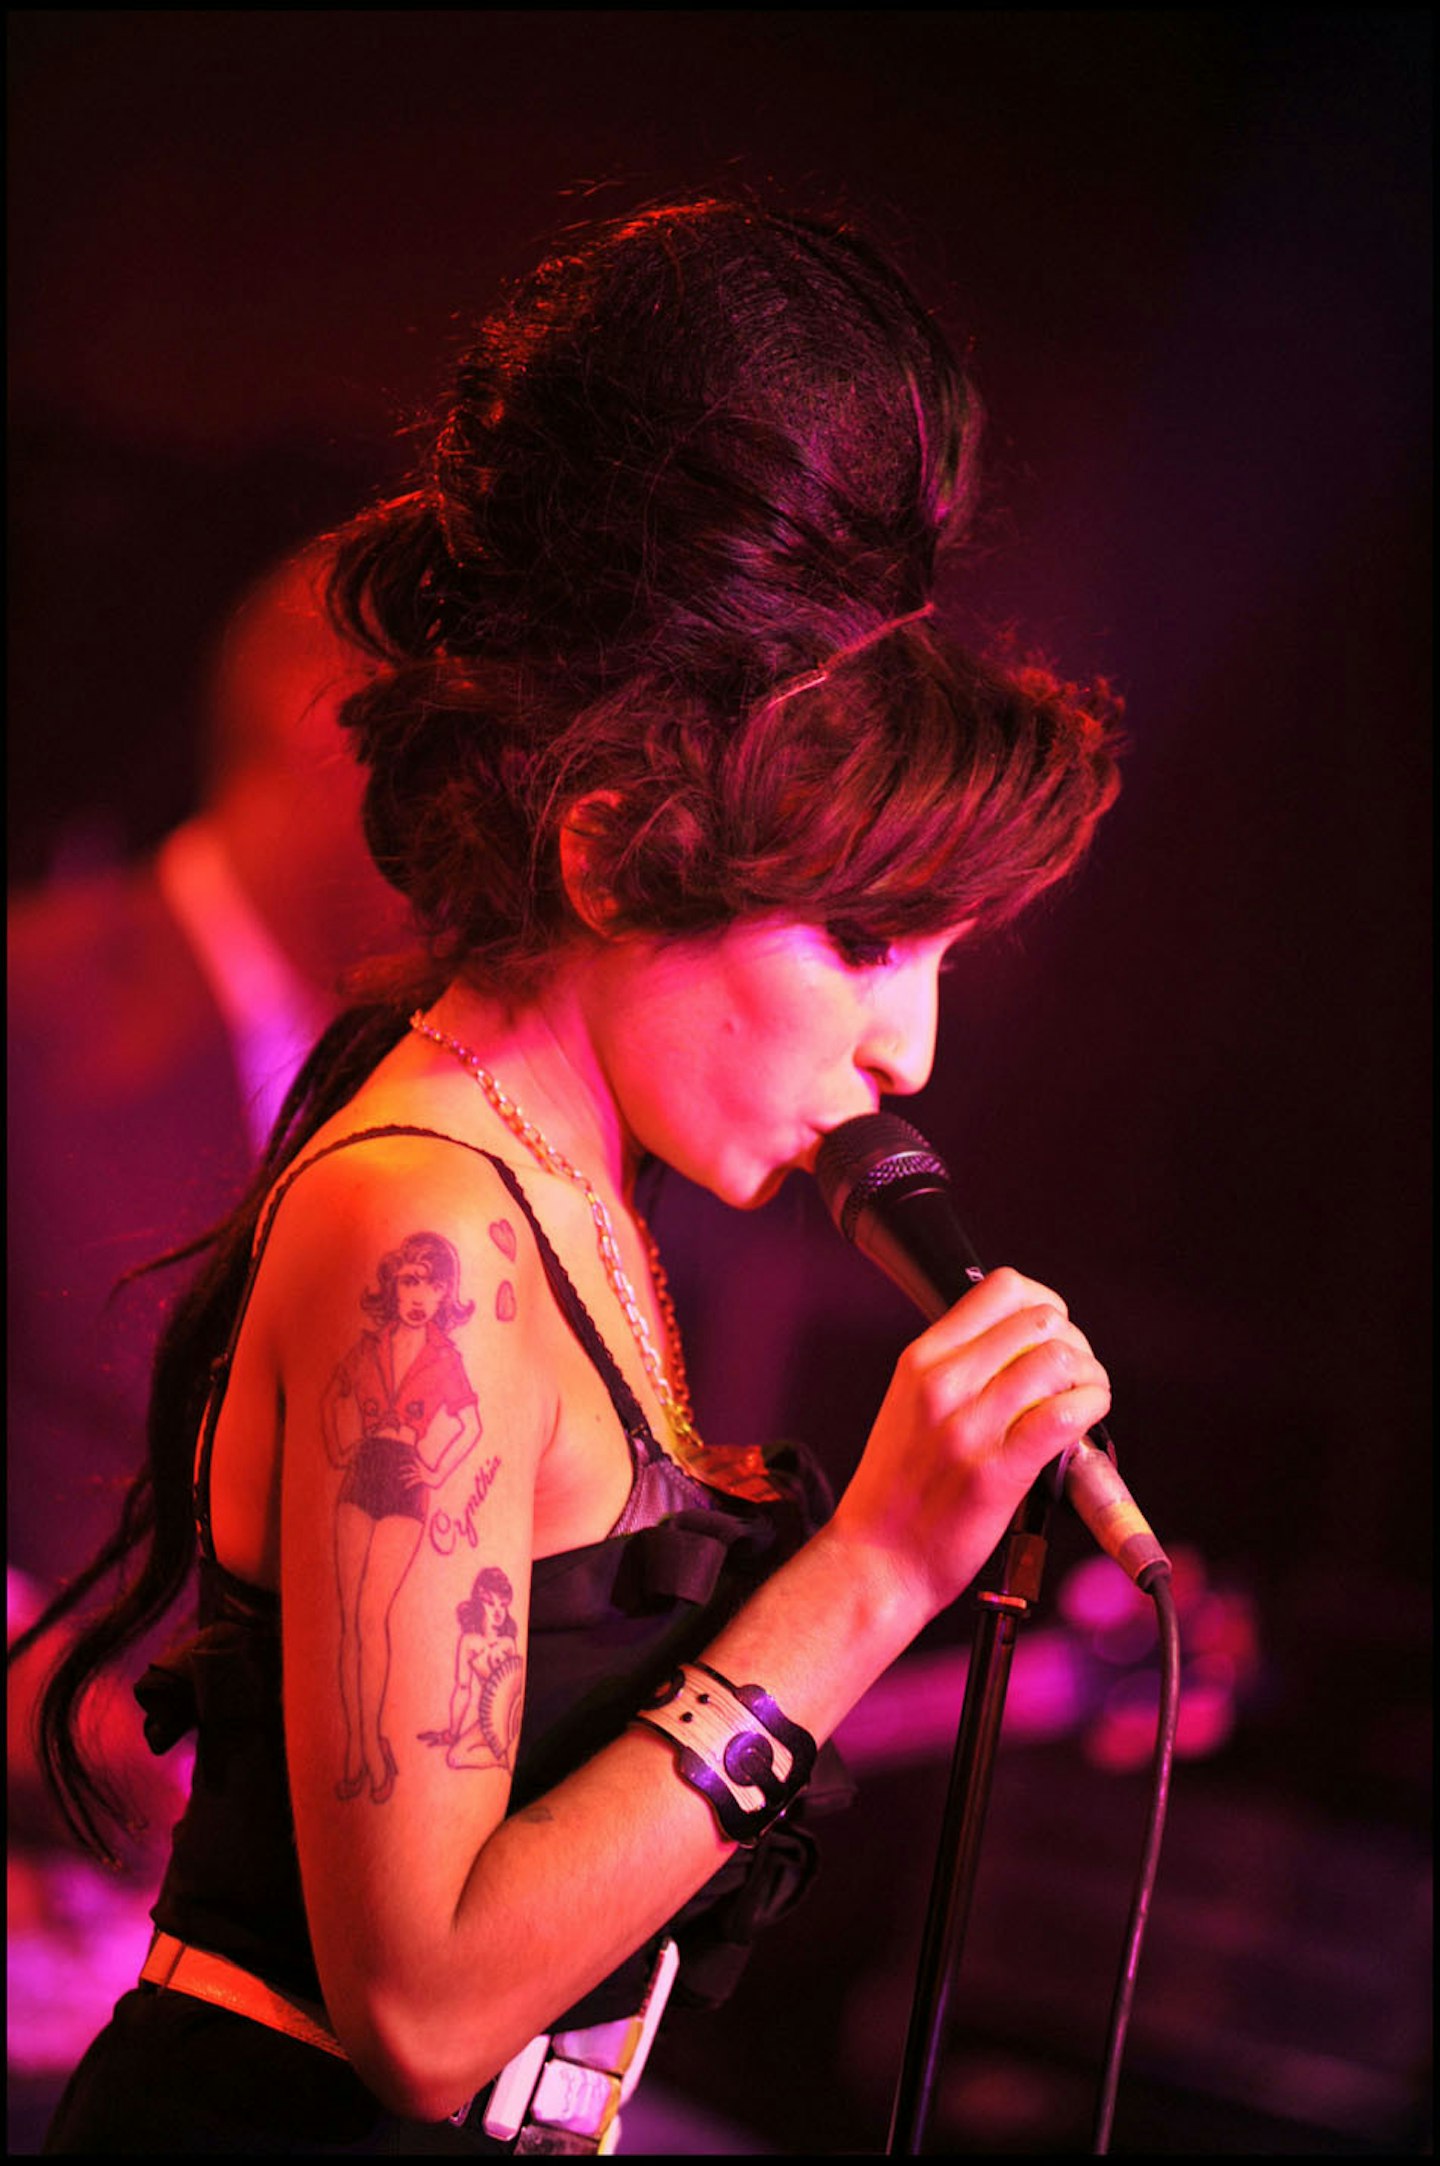 Amy performed at a Party held for the opening of the Boutique "Fendi", during Paris Fashion Week Fall/Winter 2008-2009, Paris.